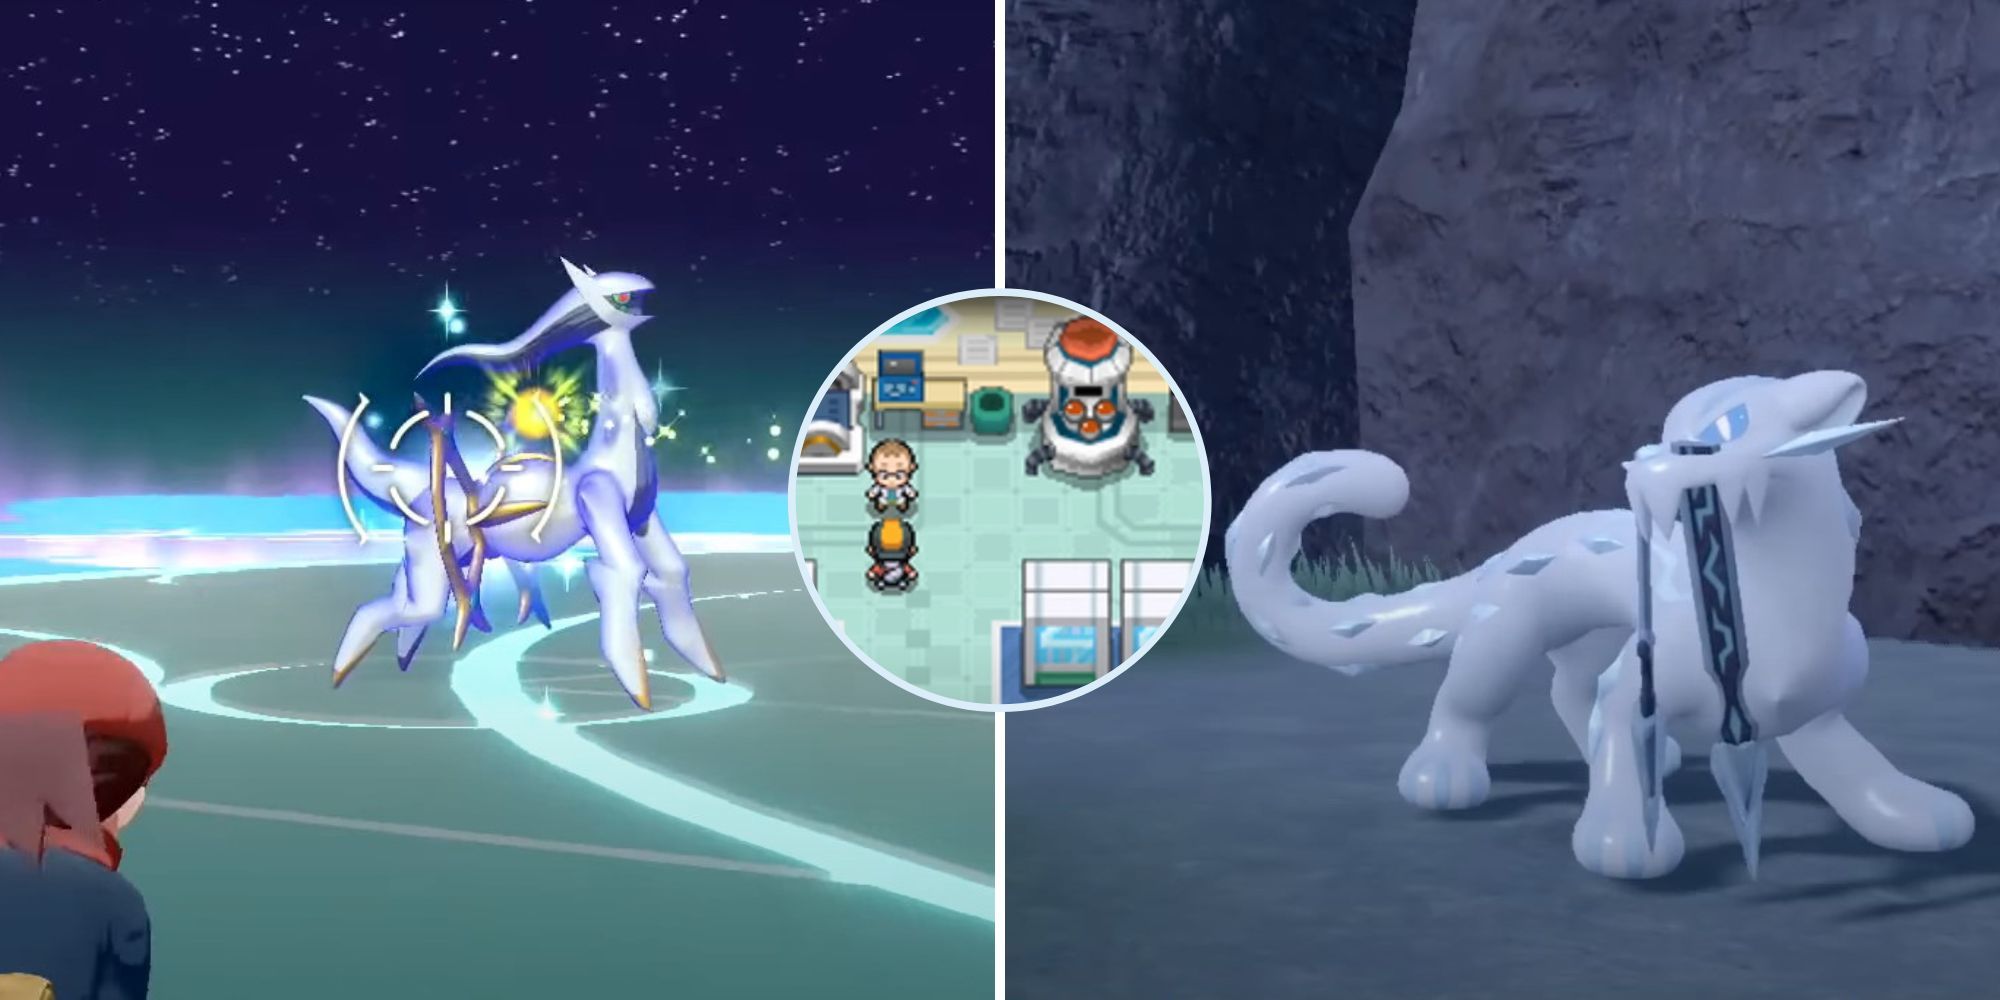 The Pokemon character is displaying Pokemon Legends Arceus, Pokemon HeartGold, and Pokemon Scarlet and Violet.